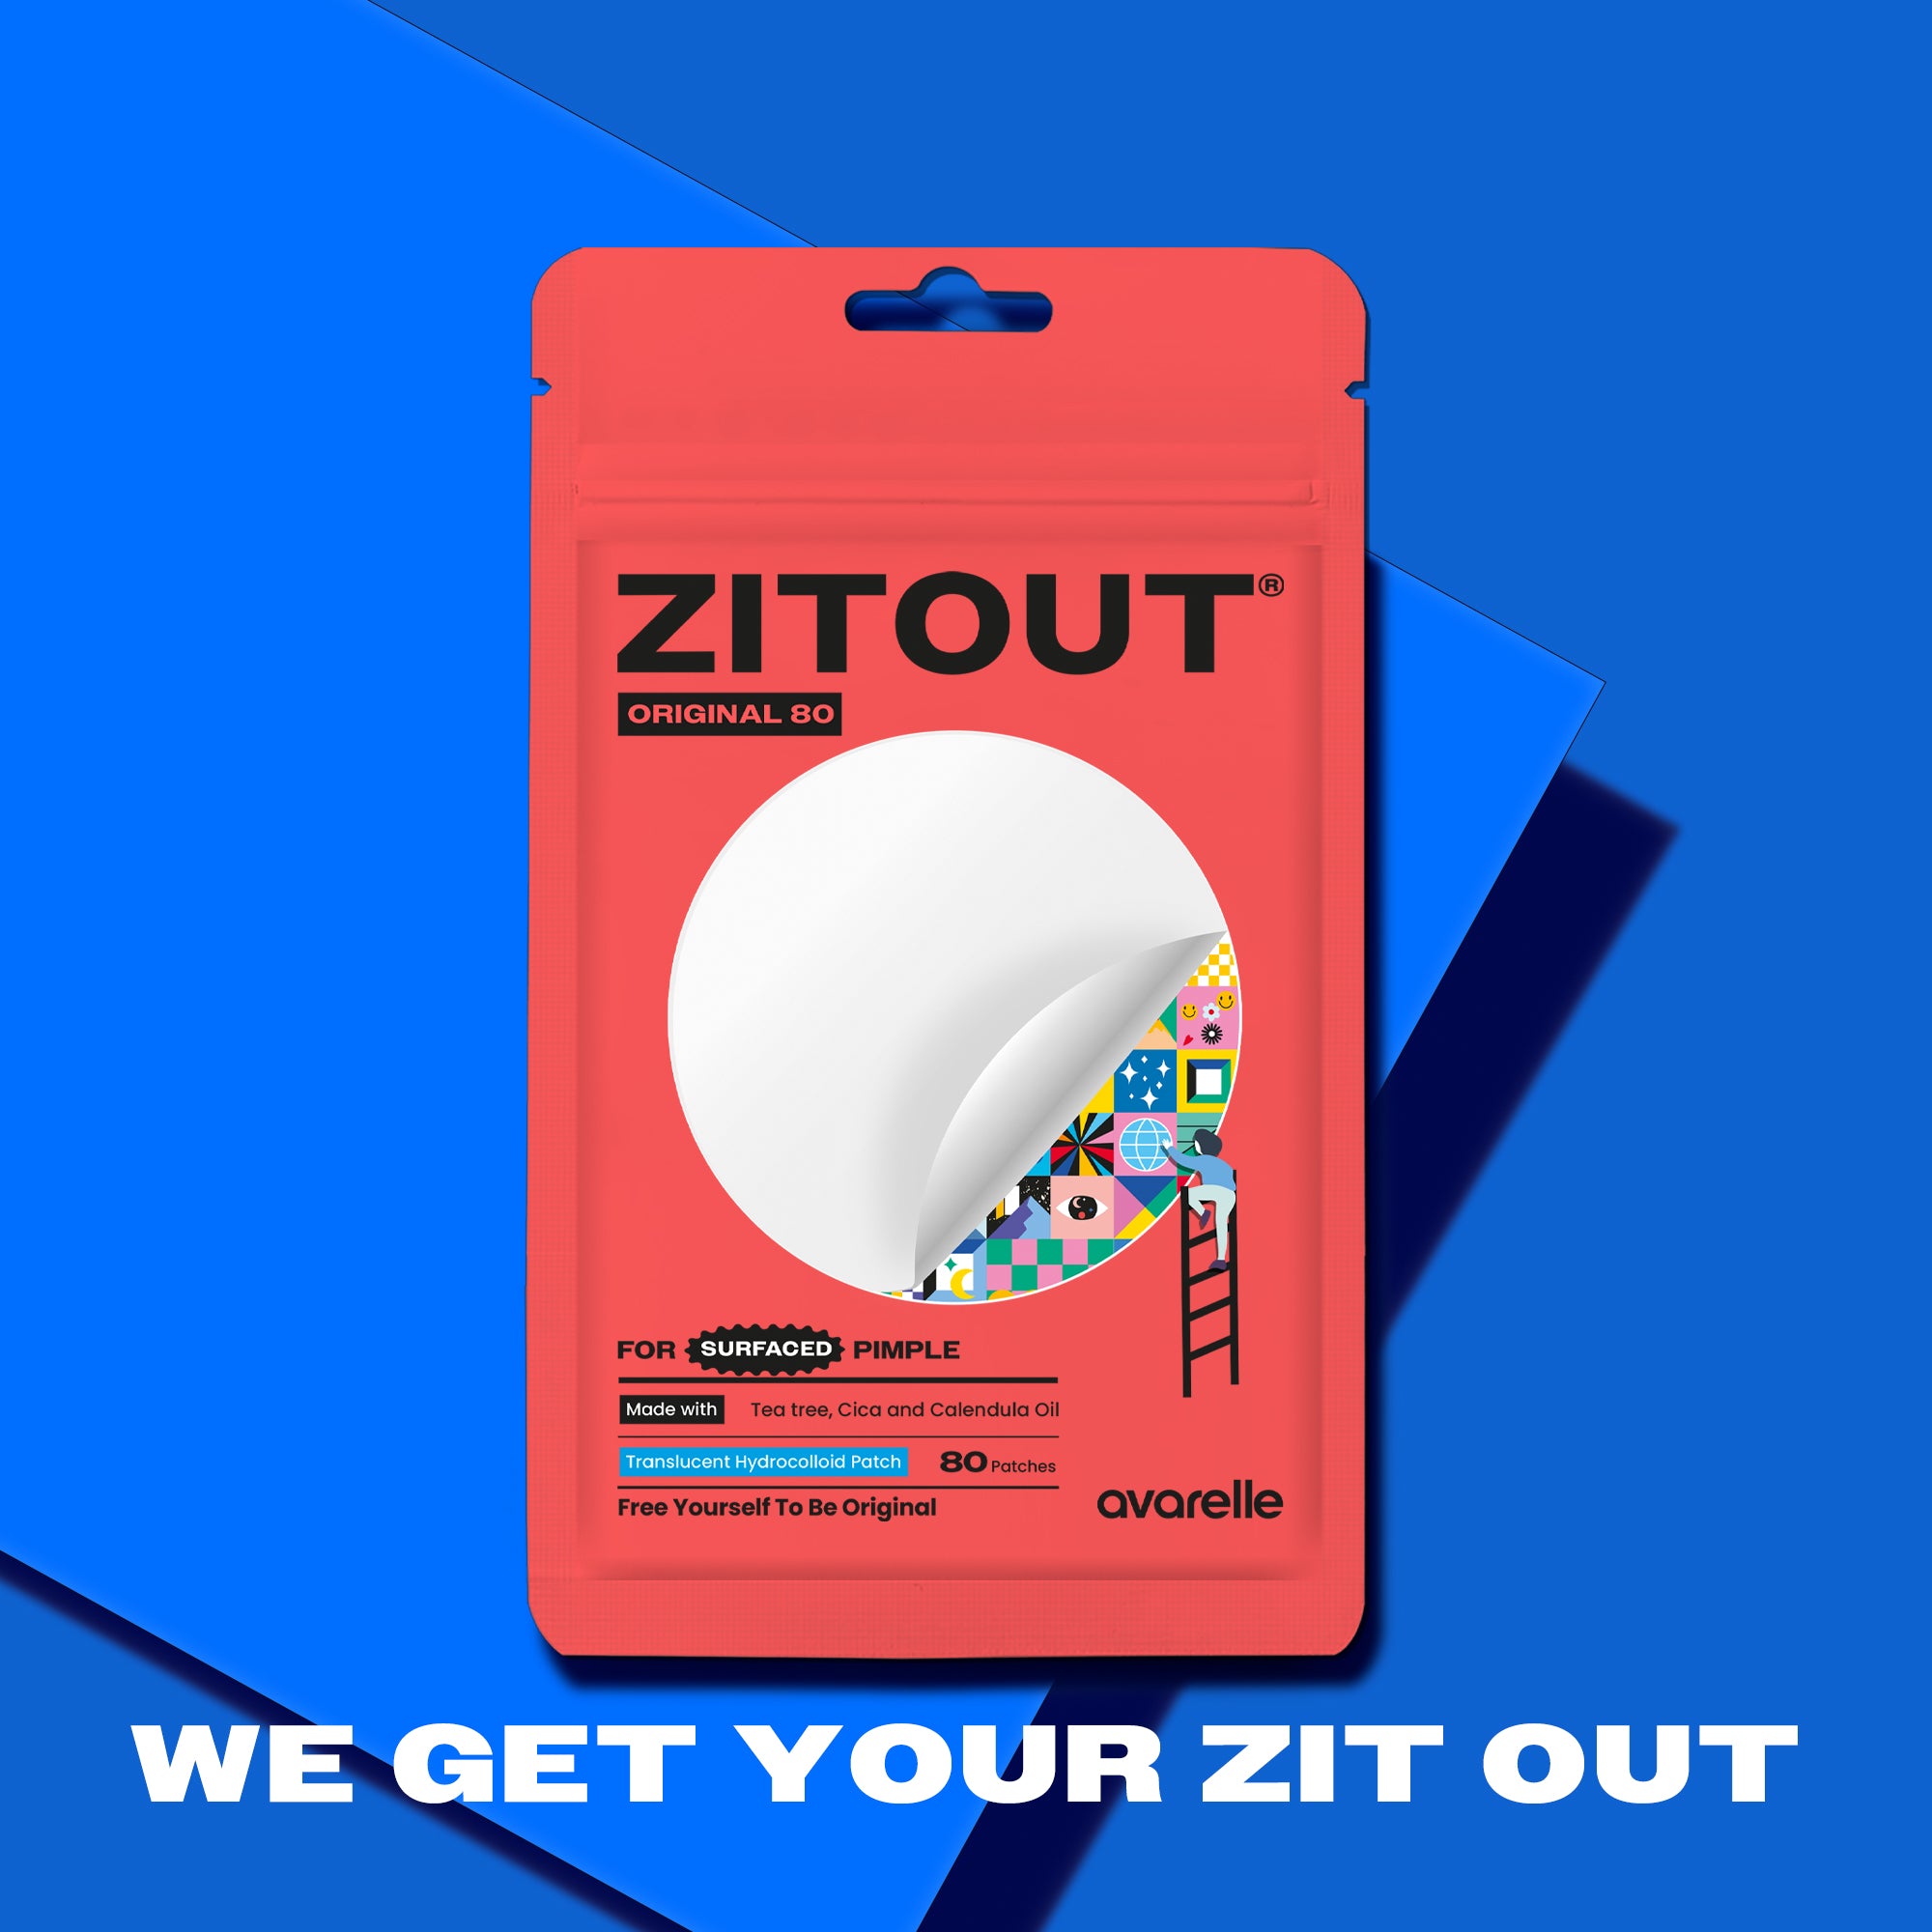 A graphic illustration of Avarelle's ZitOut Original 80 acne treatment product, featuring a hydrocolloid patch against a blue background. with the slogan "we get your zit out" 